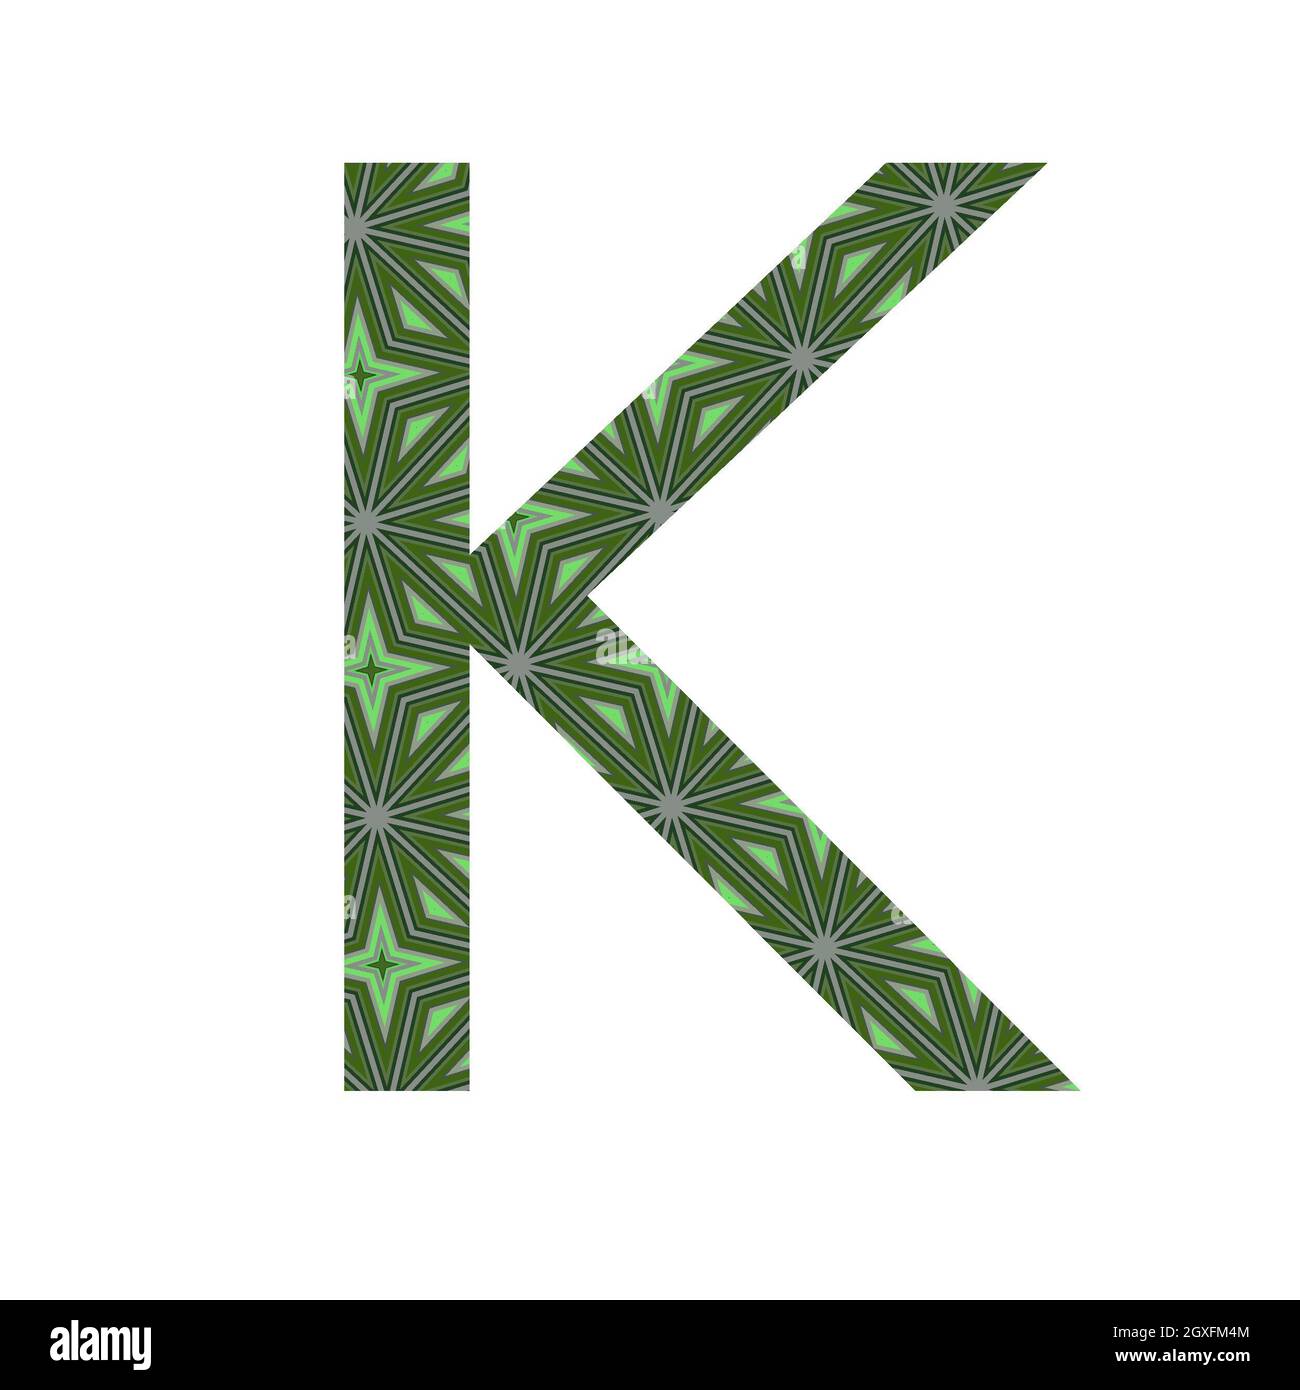 Letter K of the alphabet made with a pattern of green stars, isolated on a white background Stock Photo